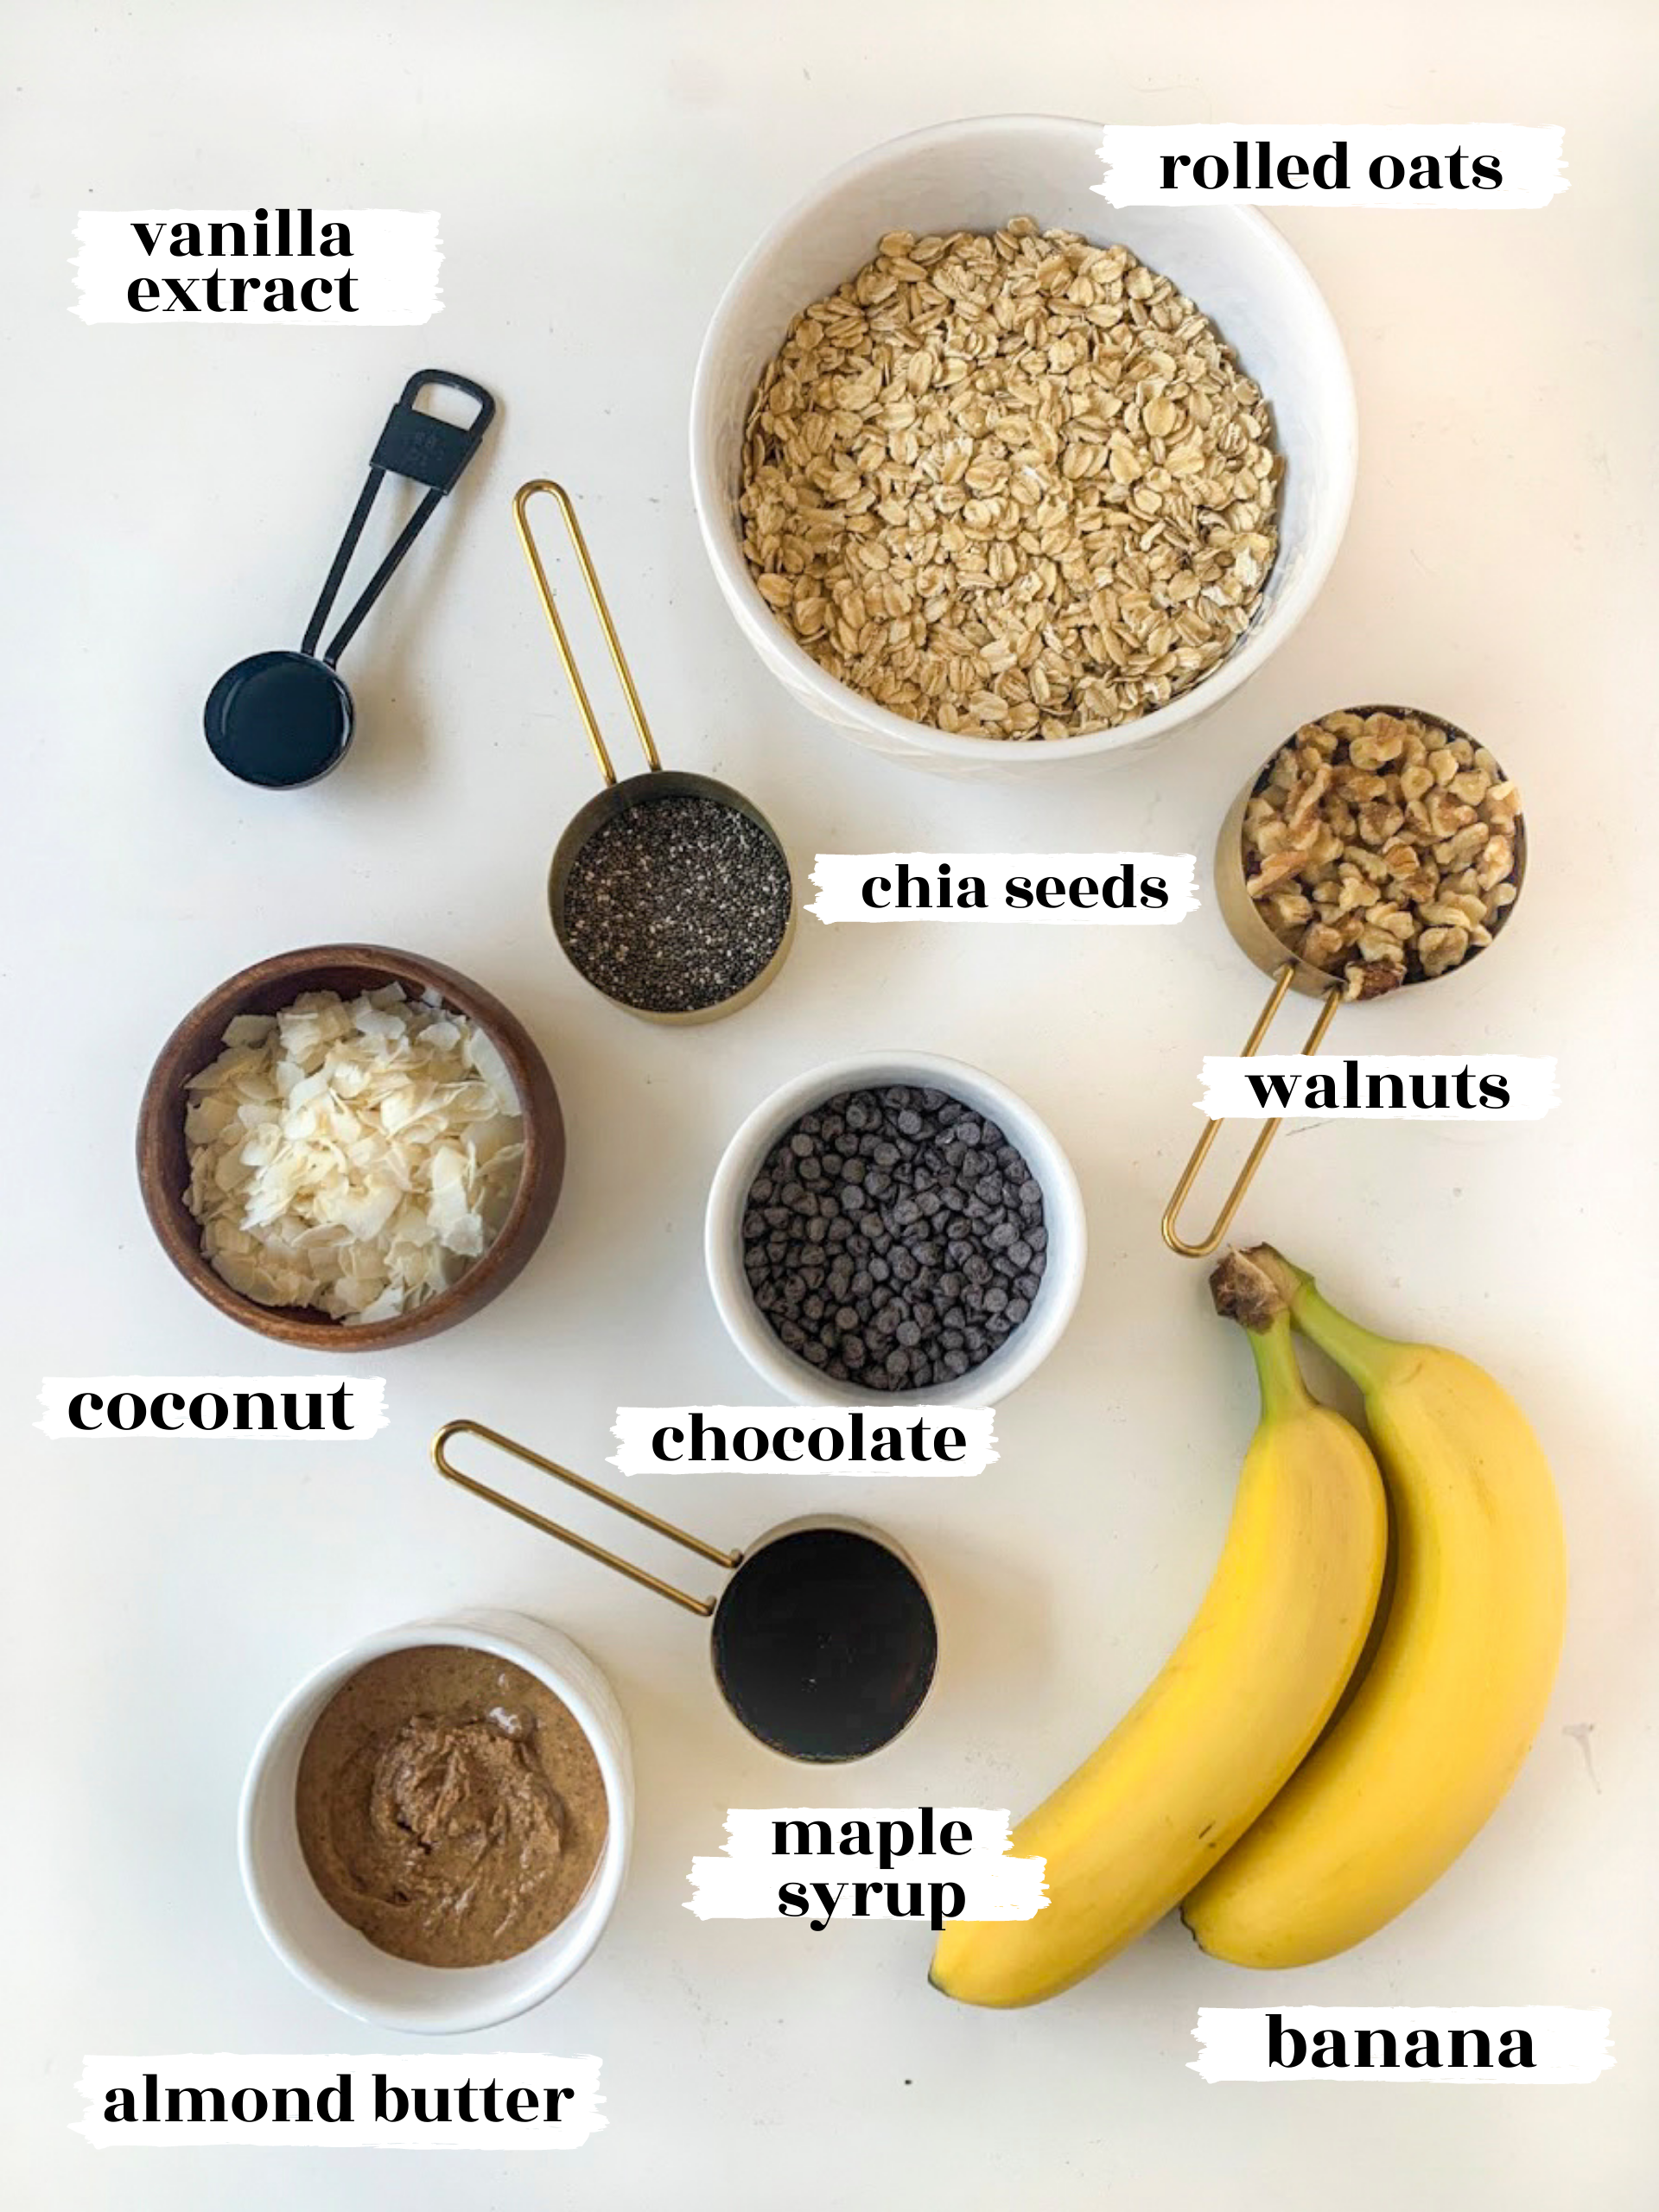 Ingredients of baked oatmeal, including oats, almond butter, banana, walnuts, chocolate chips, coconut, chia seeds and vanilla extract